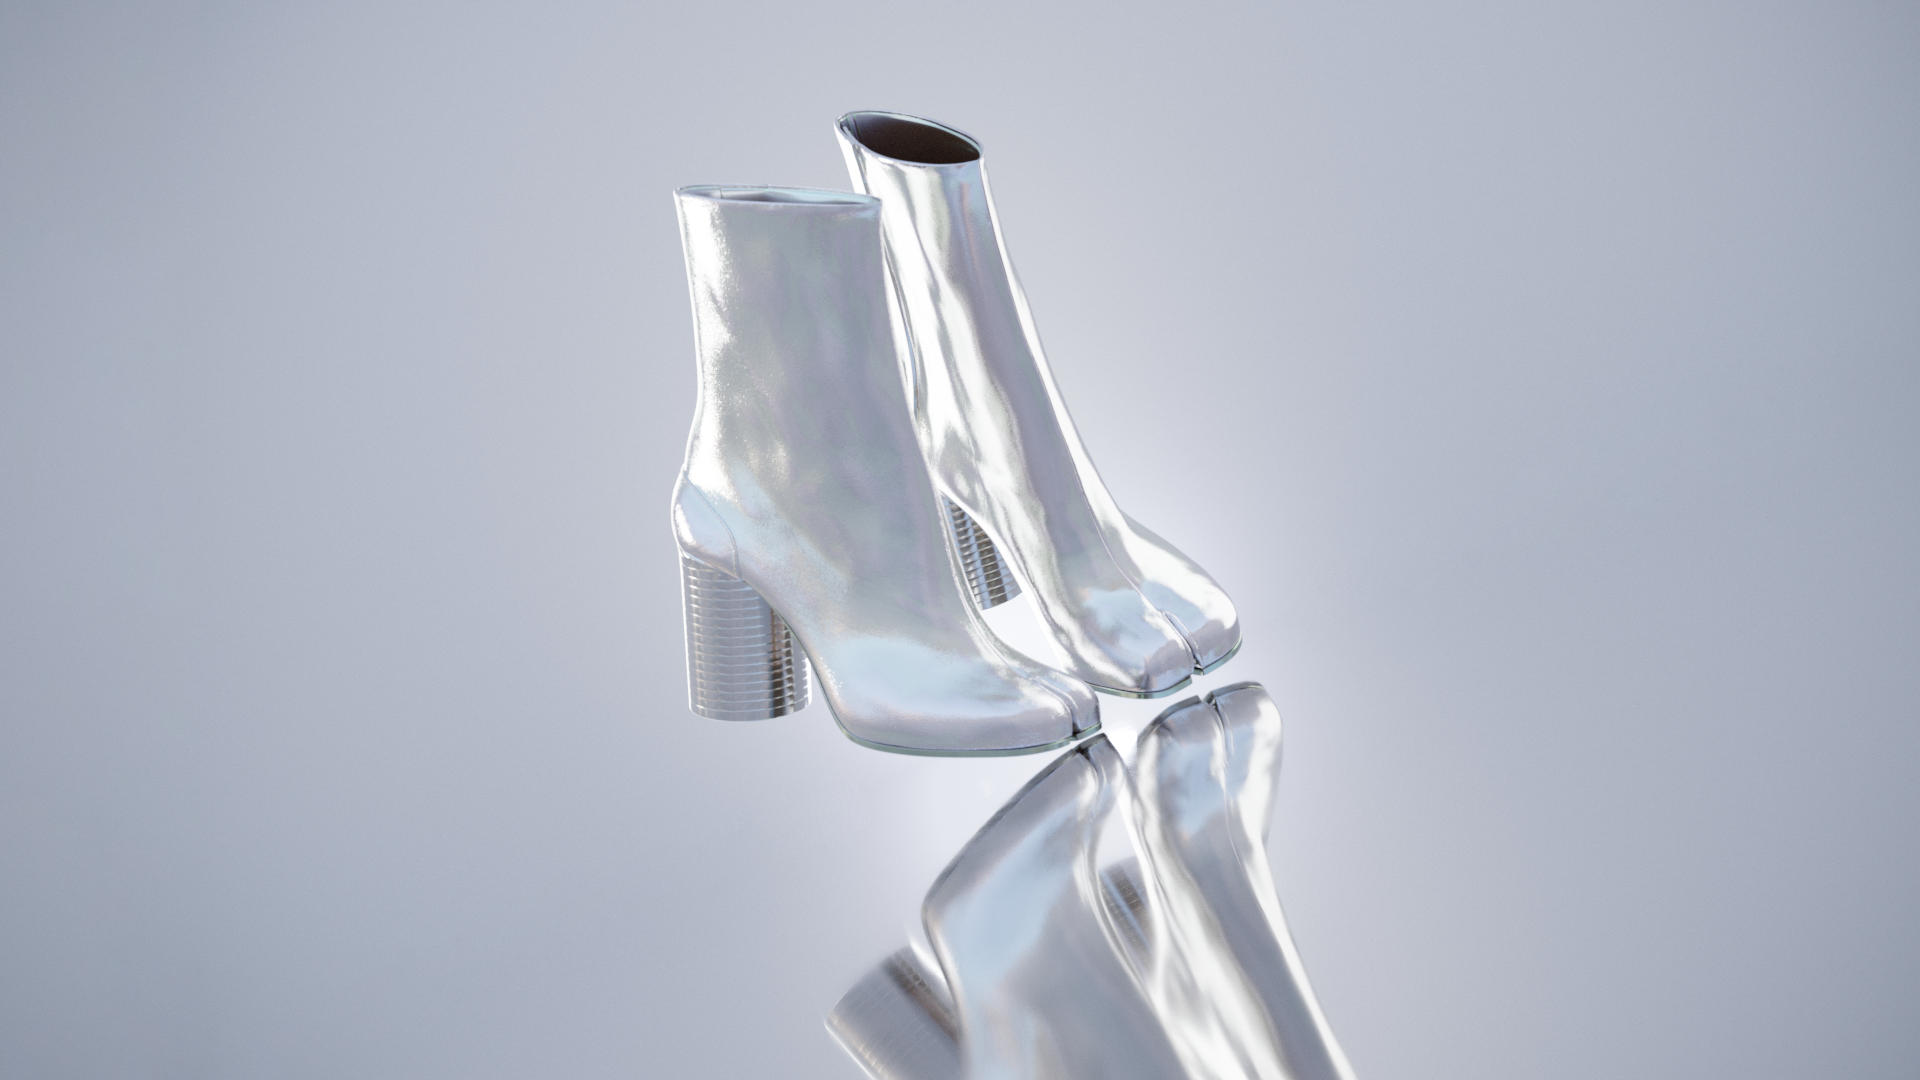 Maison Margiela is taking its Tabi boot to the metaverse